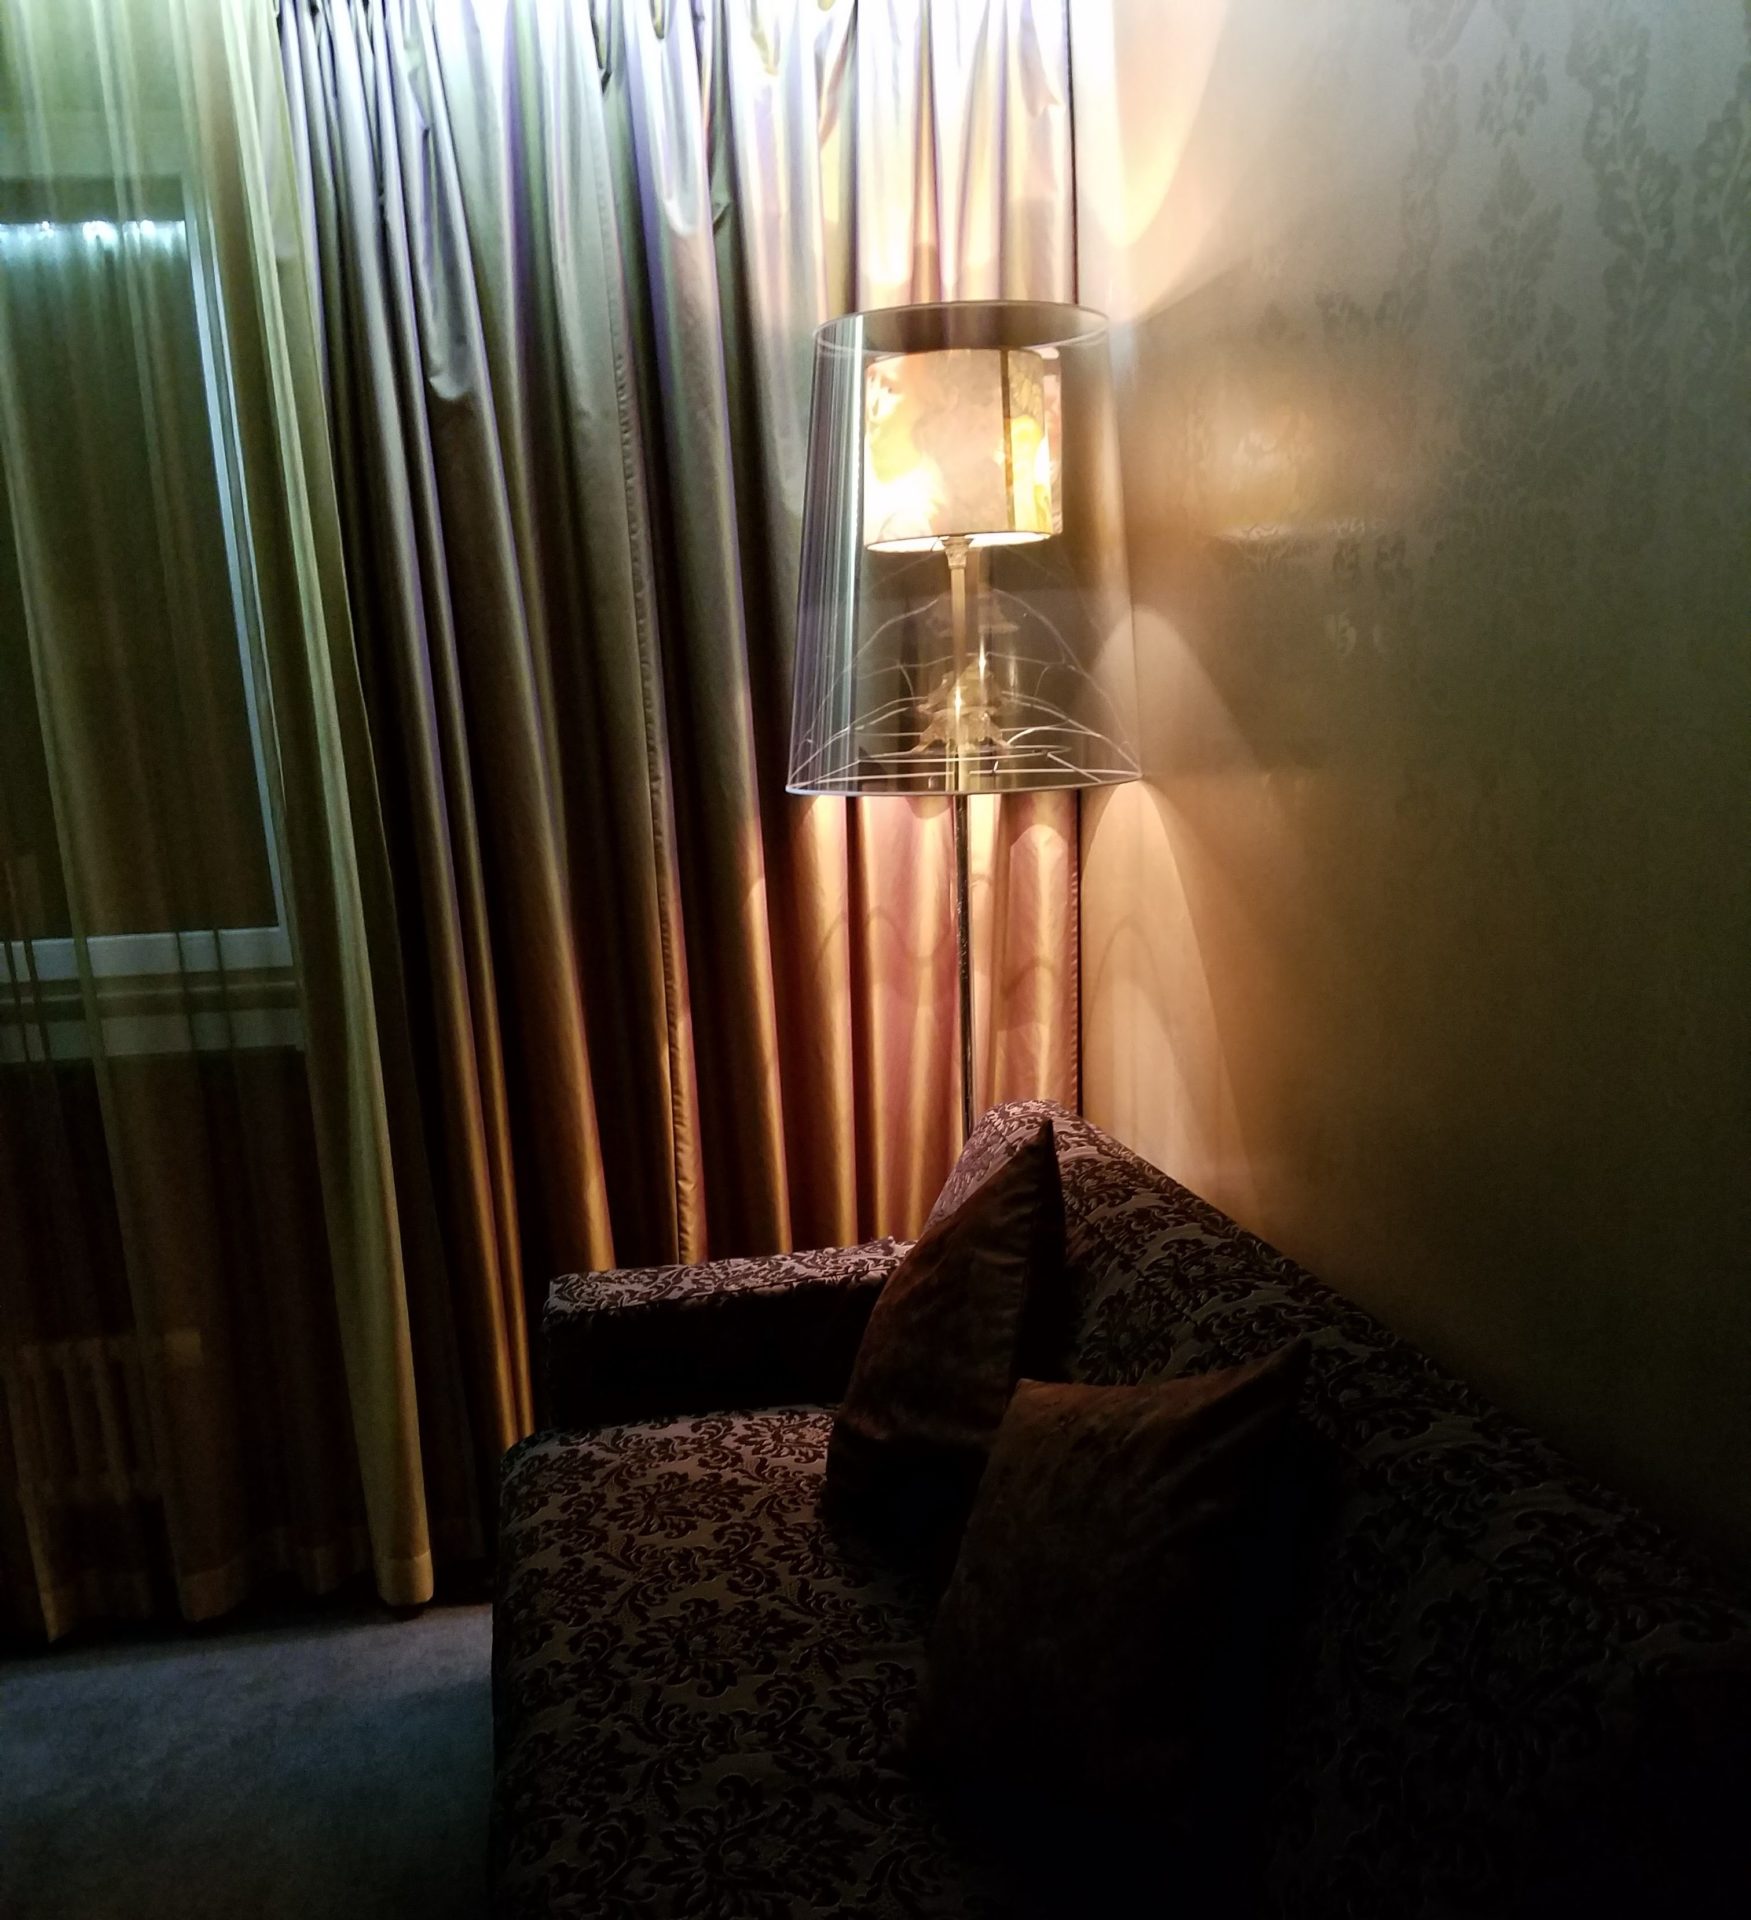 a lamp next to a couch